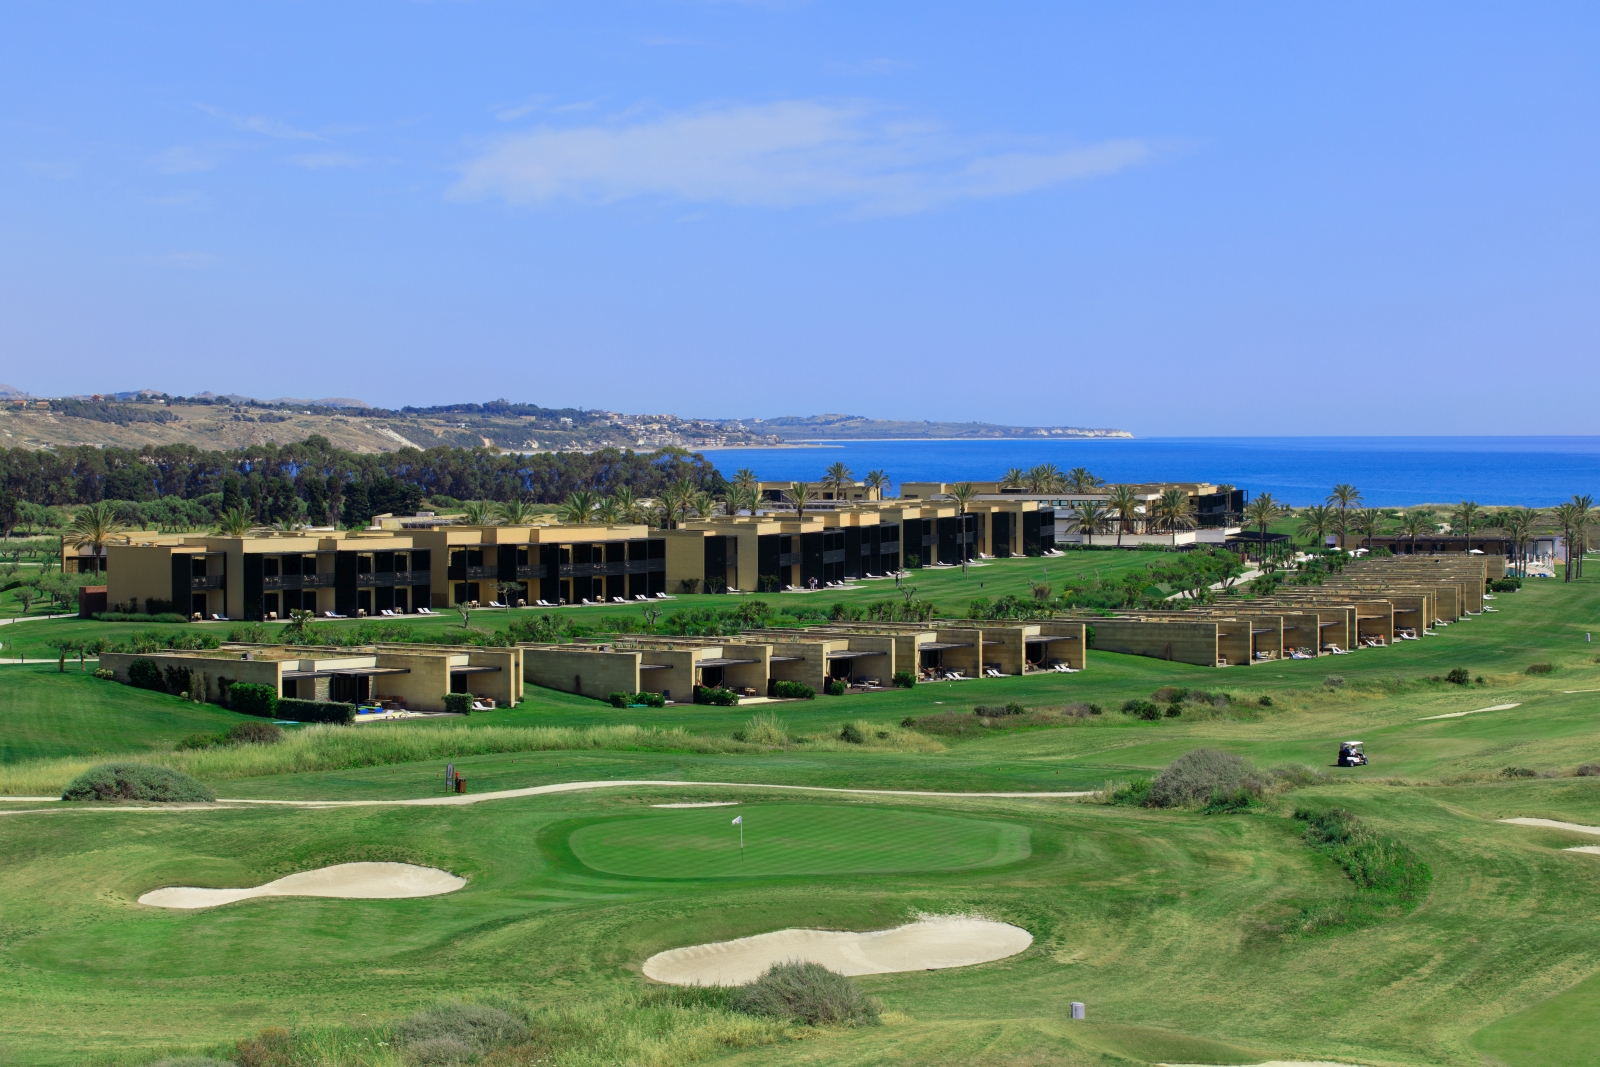 Distant view of the golf course at Verdura Resort in Italy